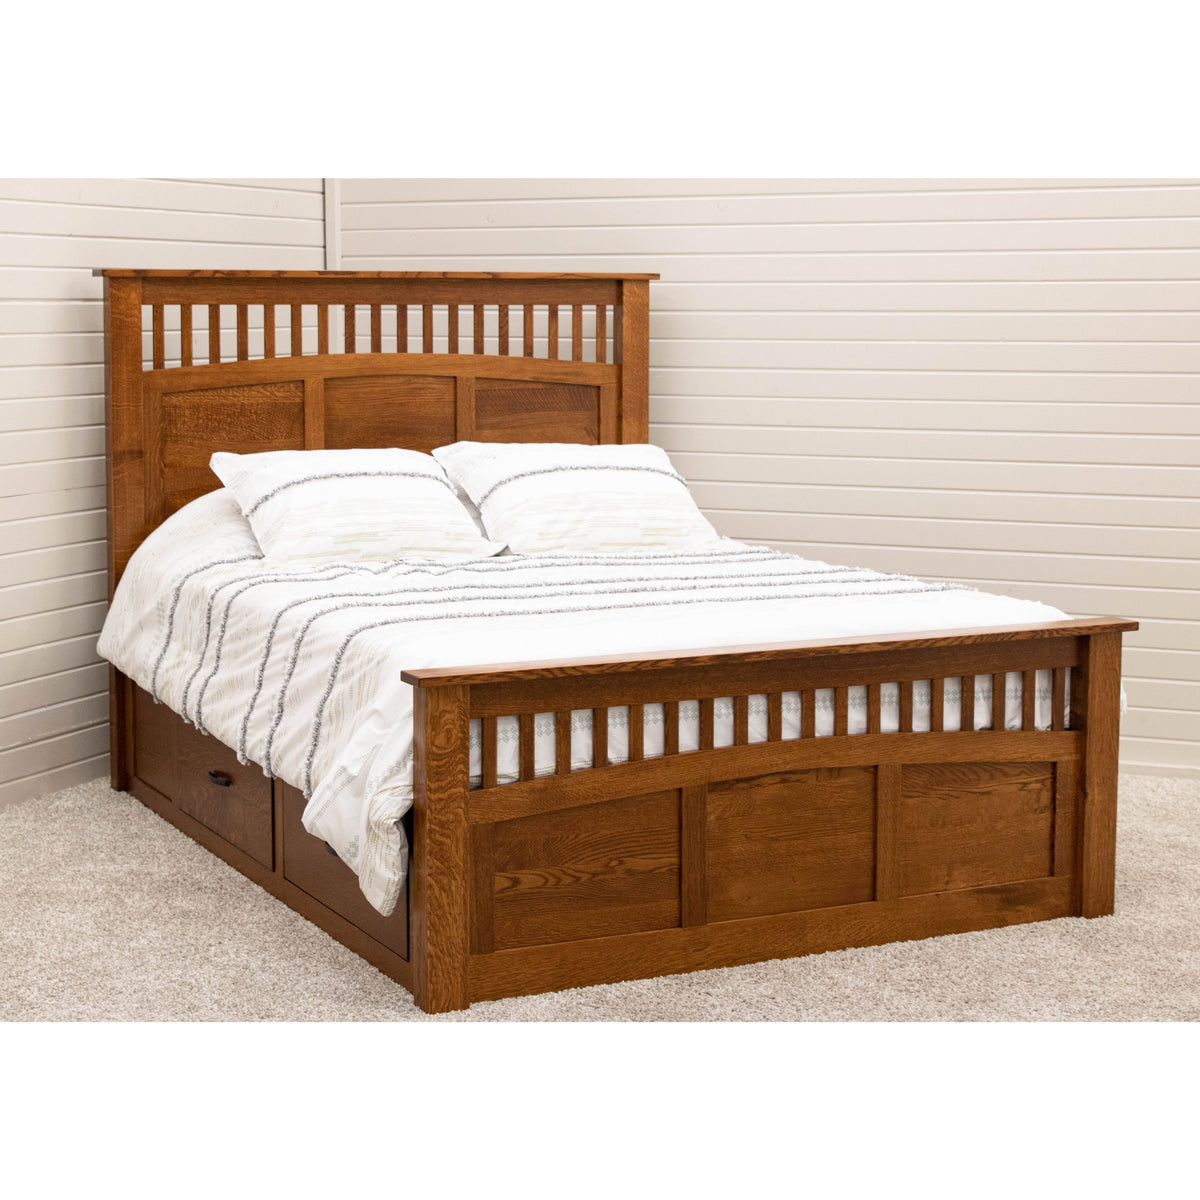 Solid Wood Amish Beds